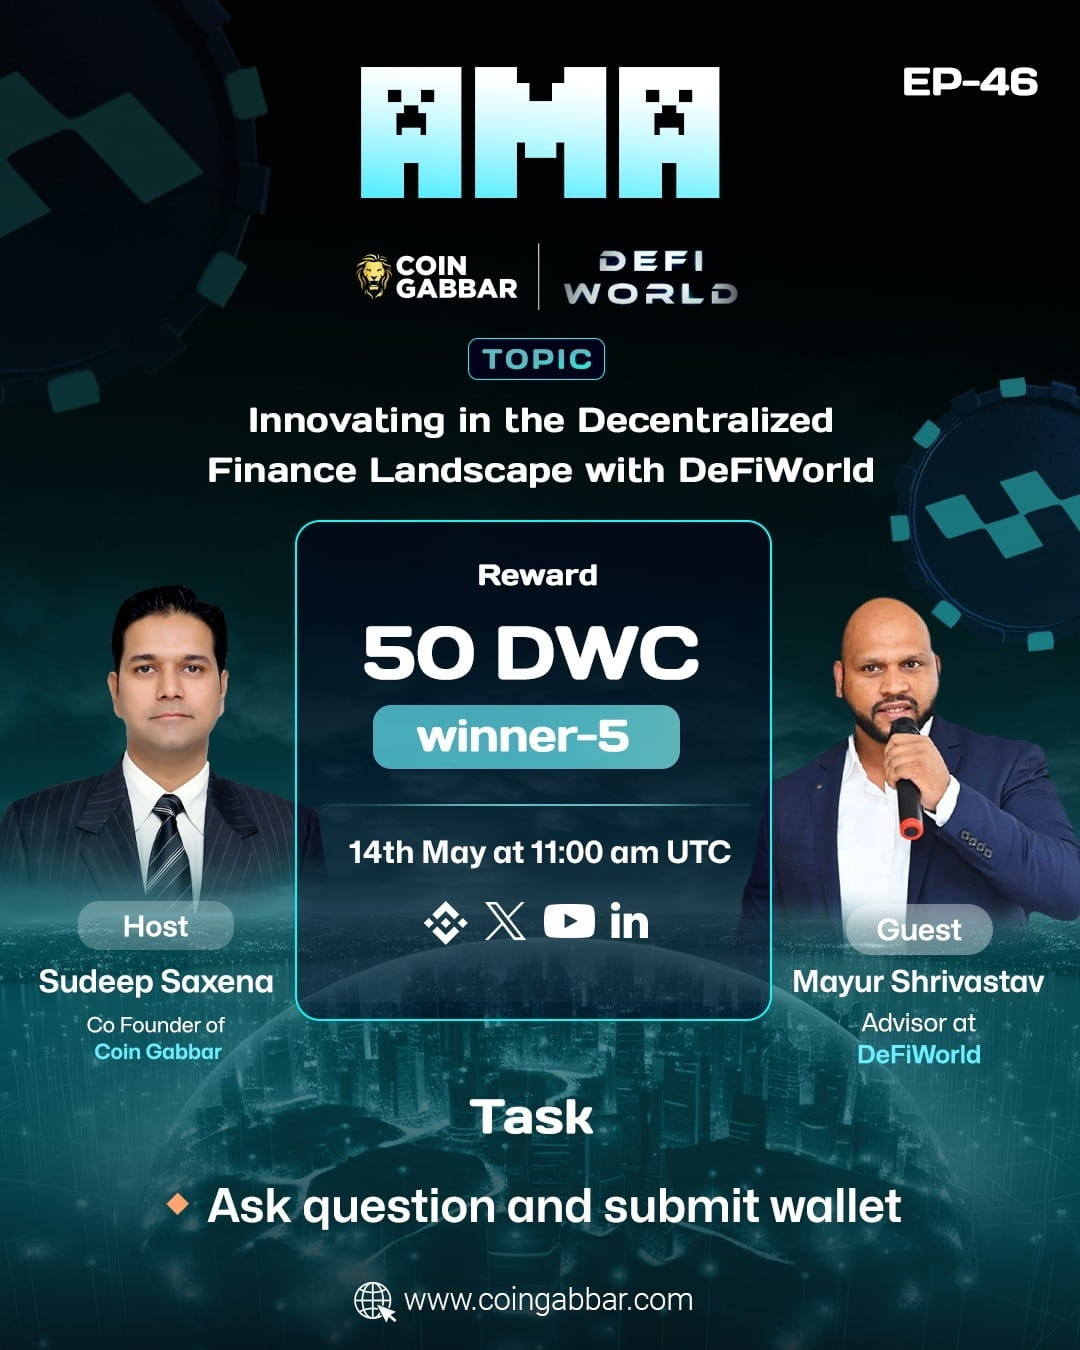  Innovating in the Decentralized Finance Landscape with DeFiWorld